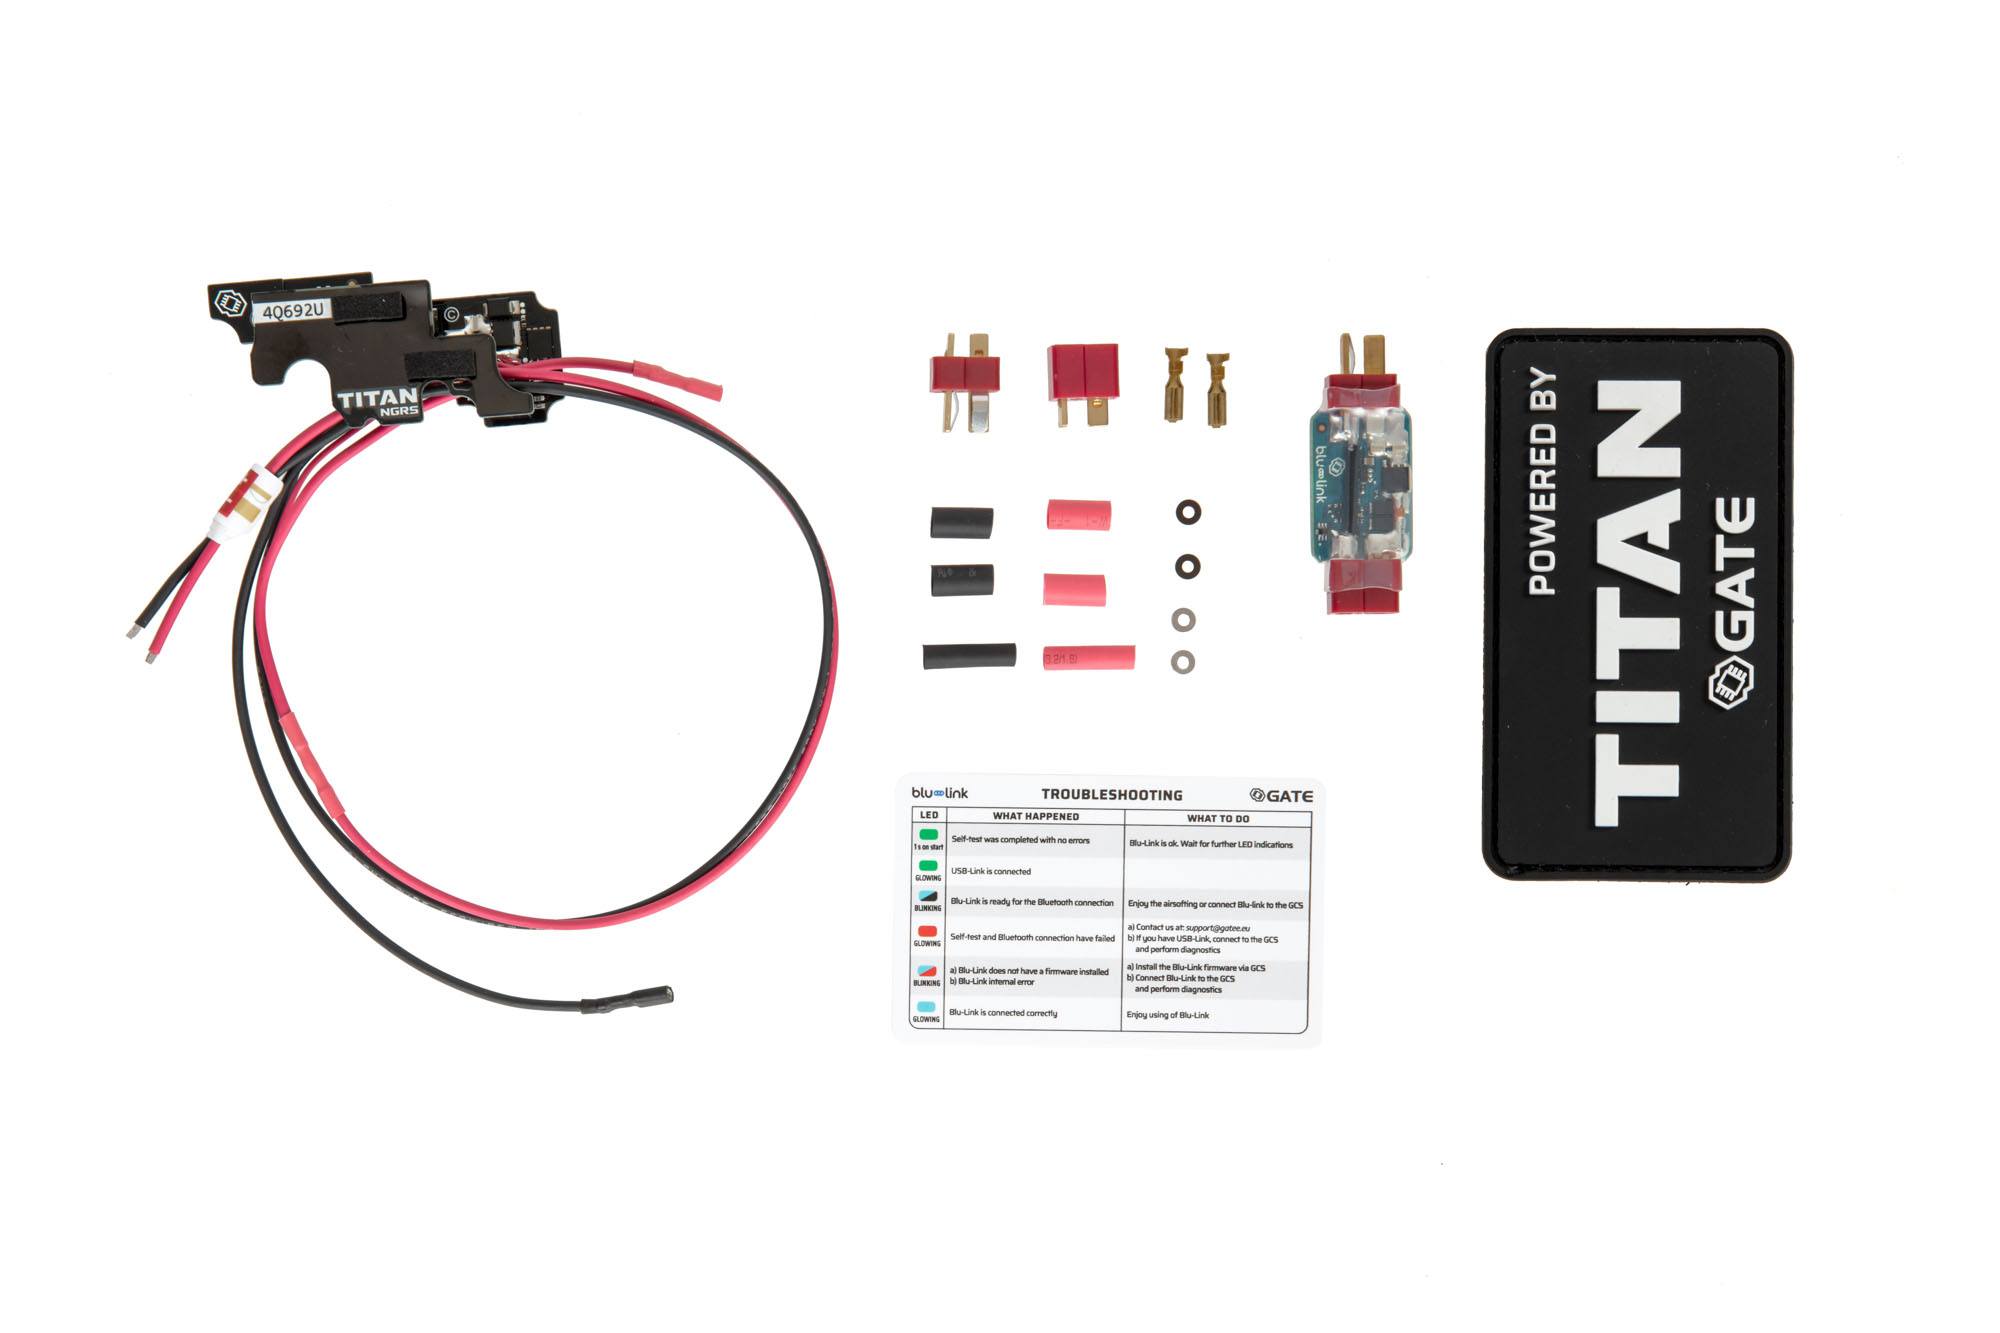 TITAN ™ NGRS Expert Blu-Set Controller Set [Rear Wired] by GATE on Airsoft Mania Europe